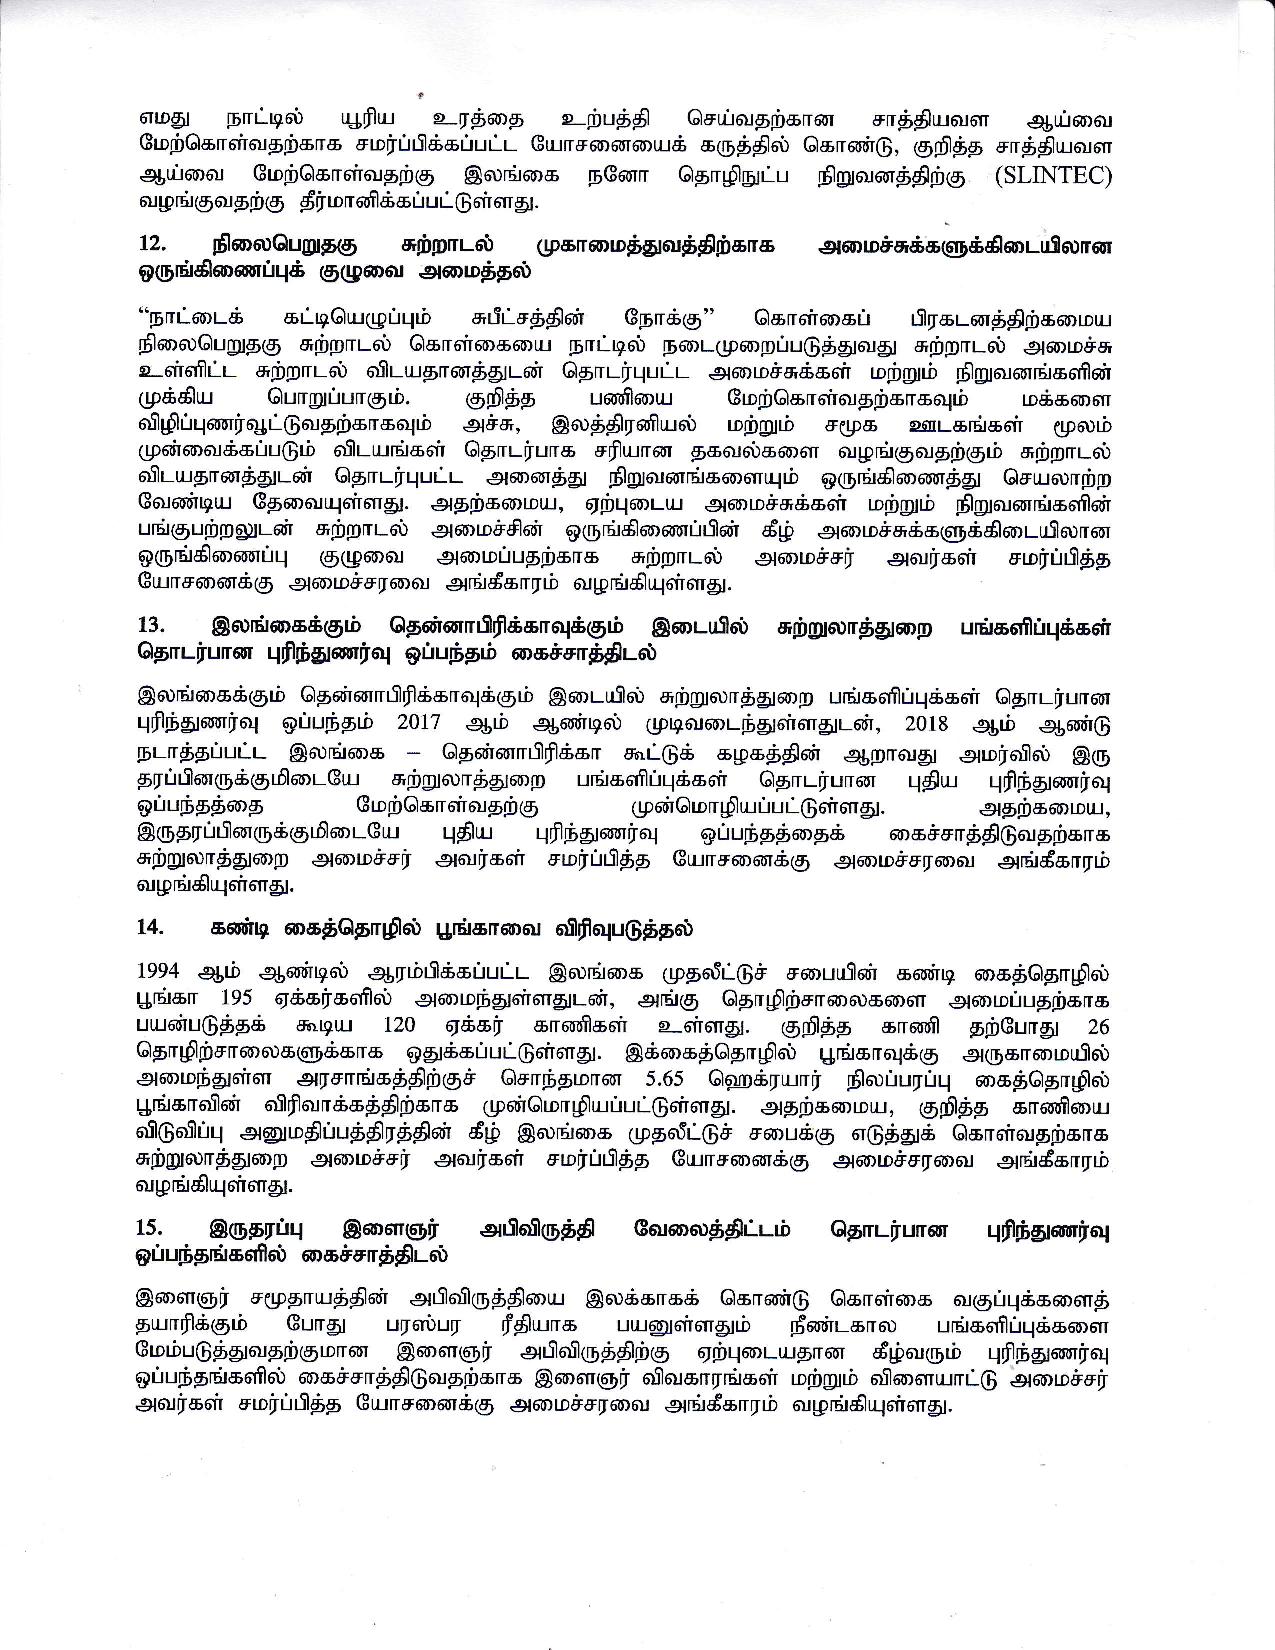 Cabinet Decision on 21.12.2020 Tamil page 005